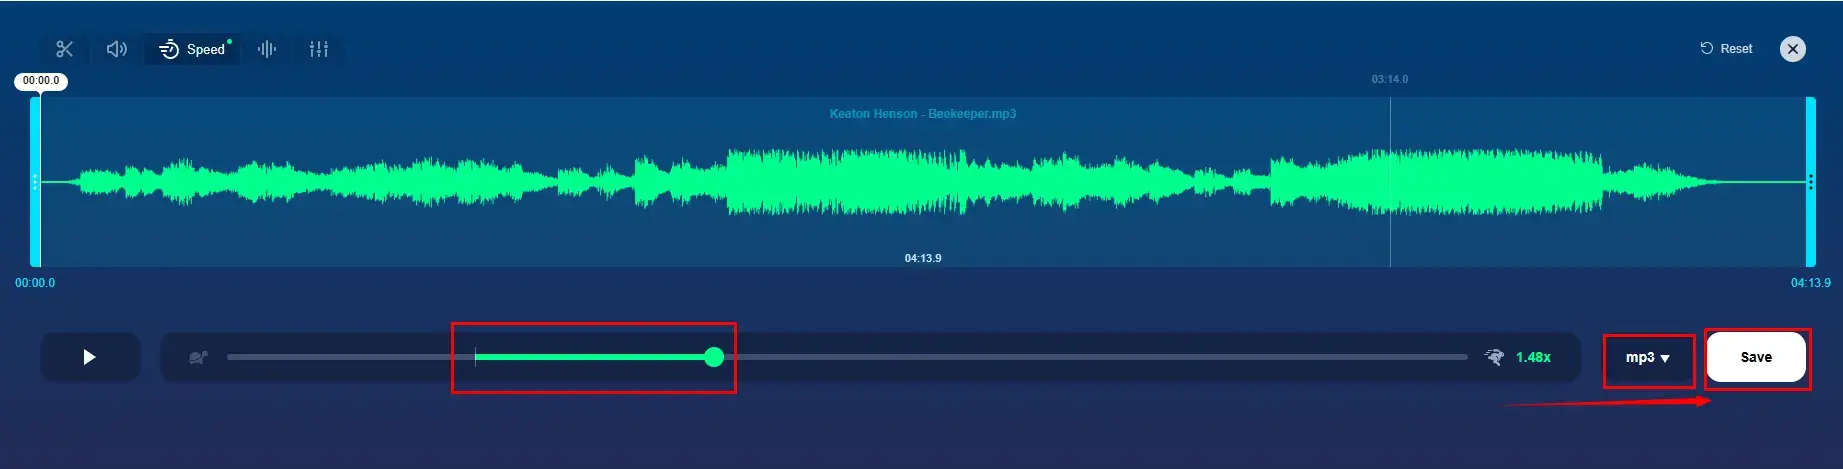 how to change audio speed in 123 apps audio speed changer